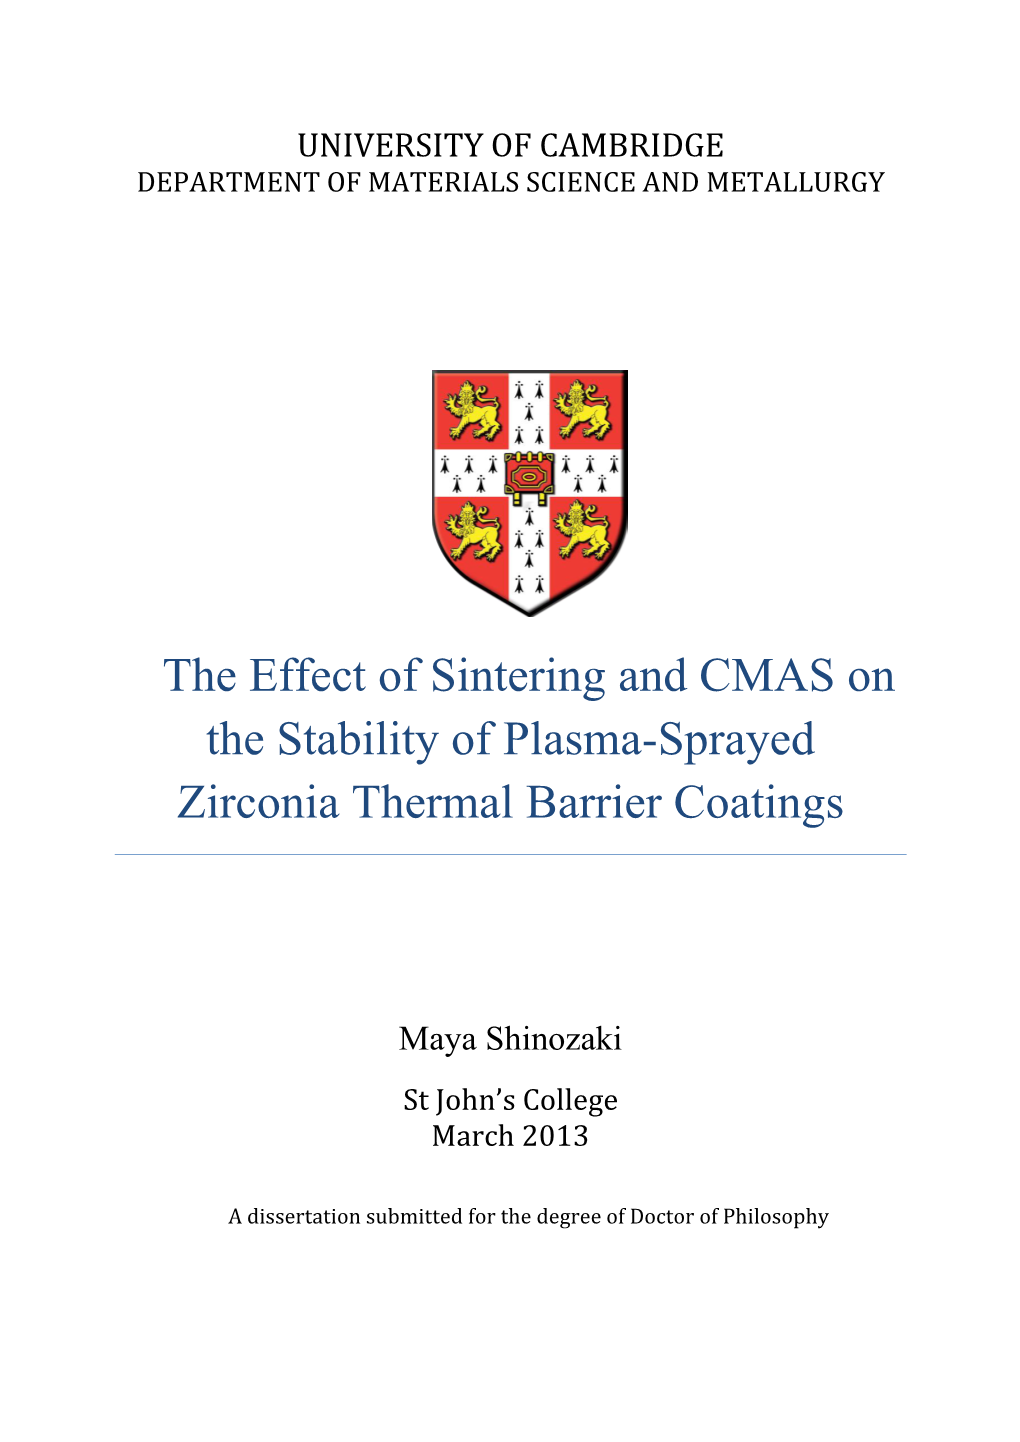 The Effect of Sintering and CMAS on the Stability of Plasma-Sprayed Zirconia Thermal Barrier Coatings